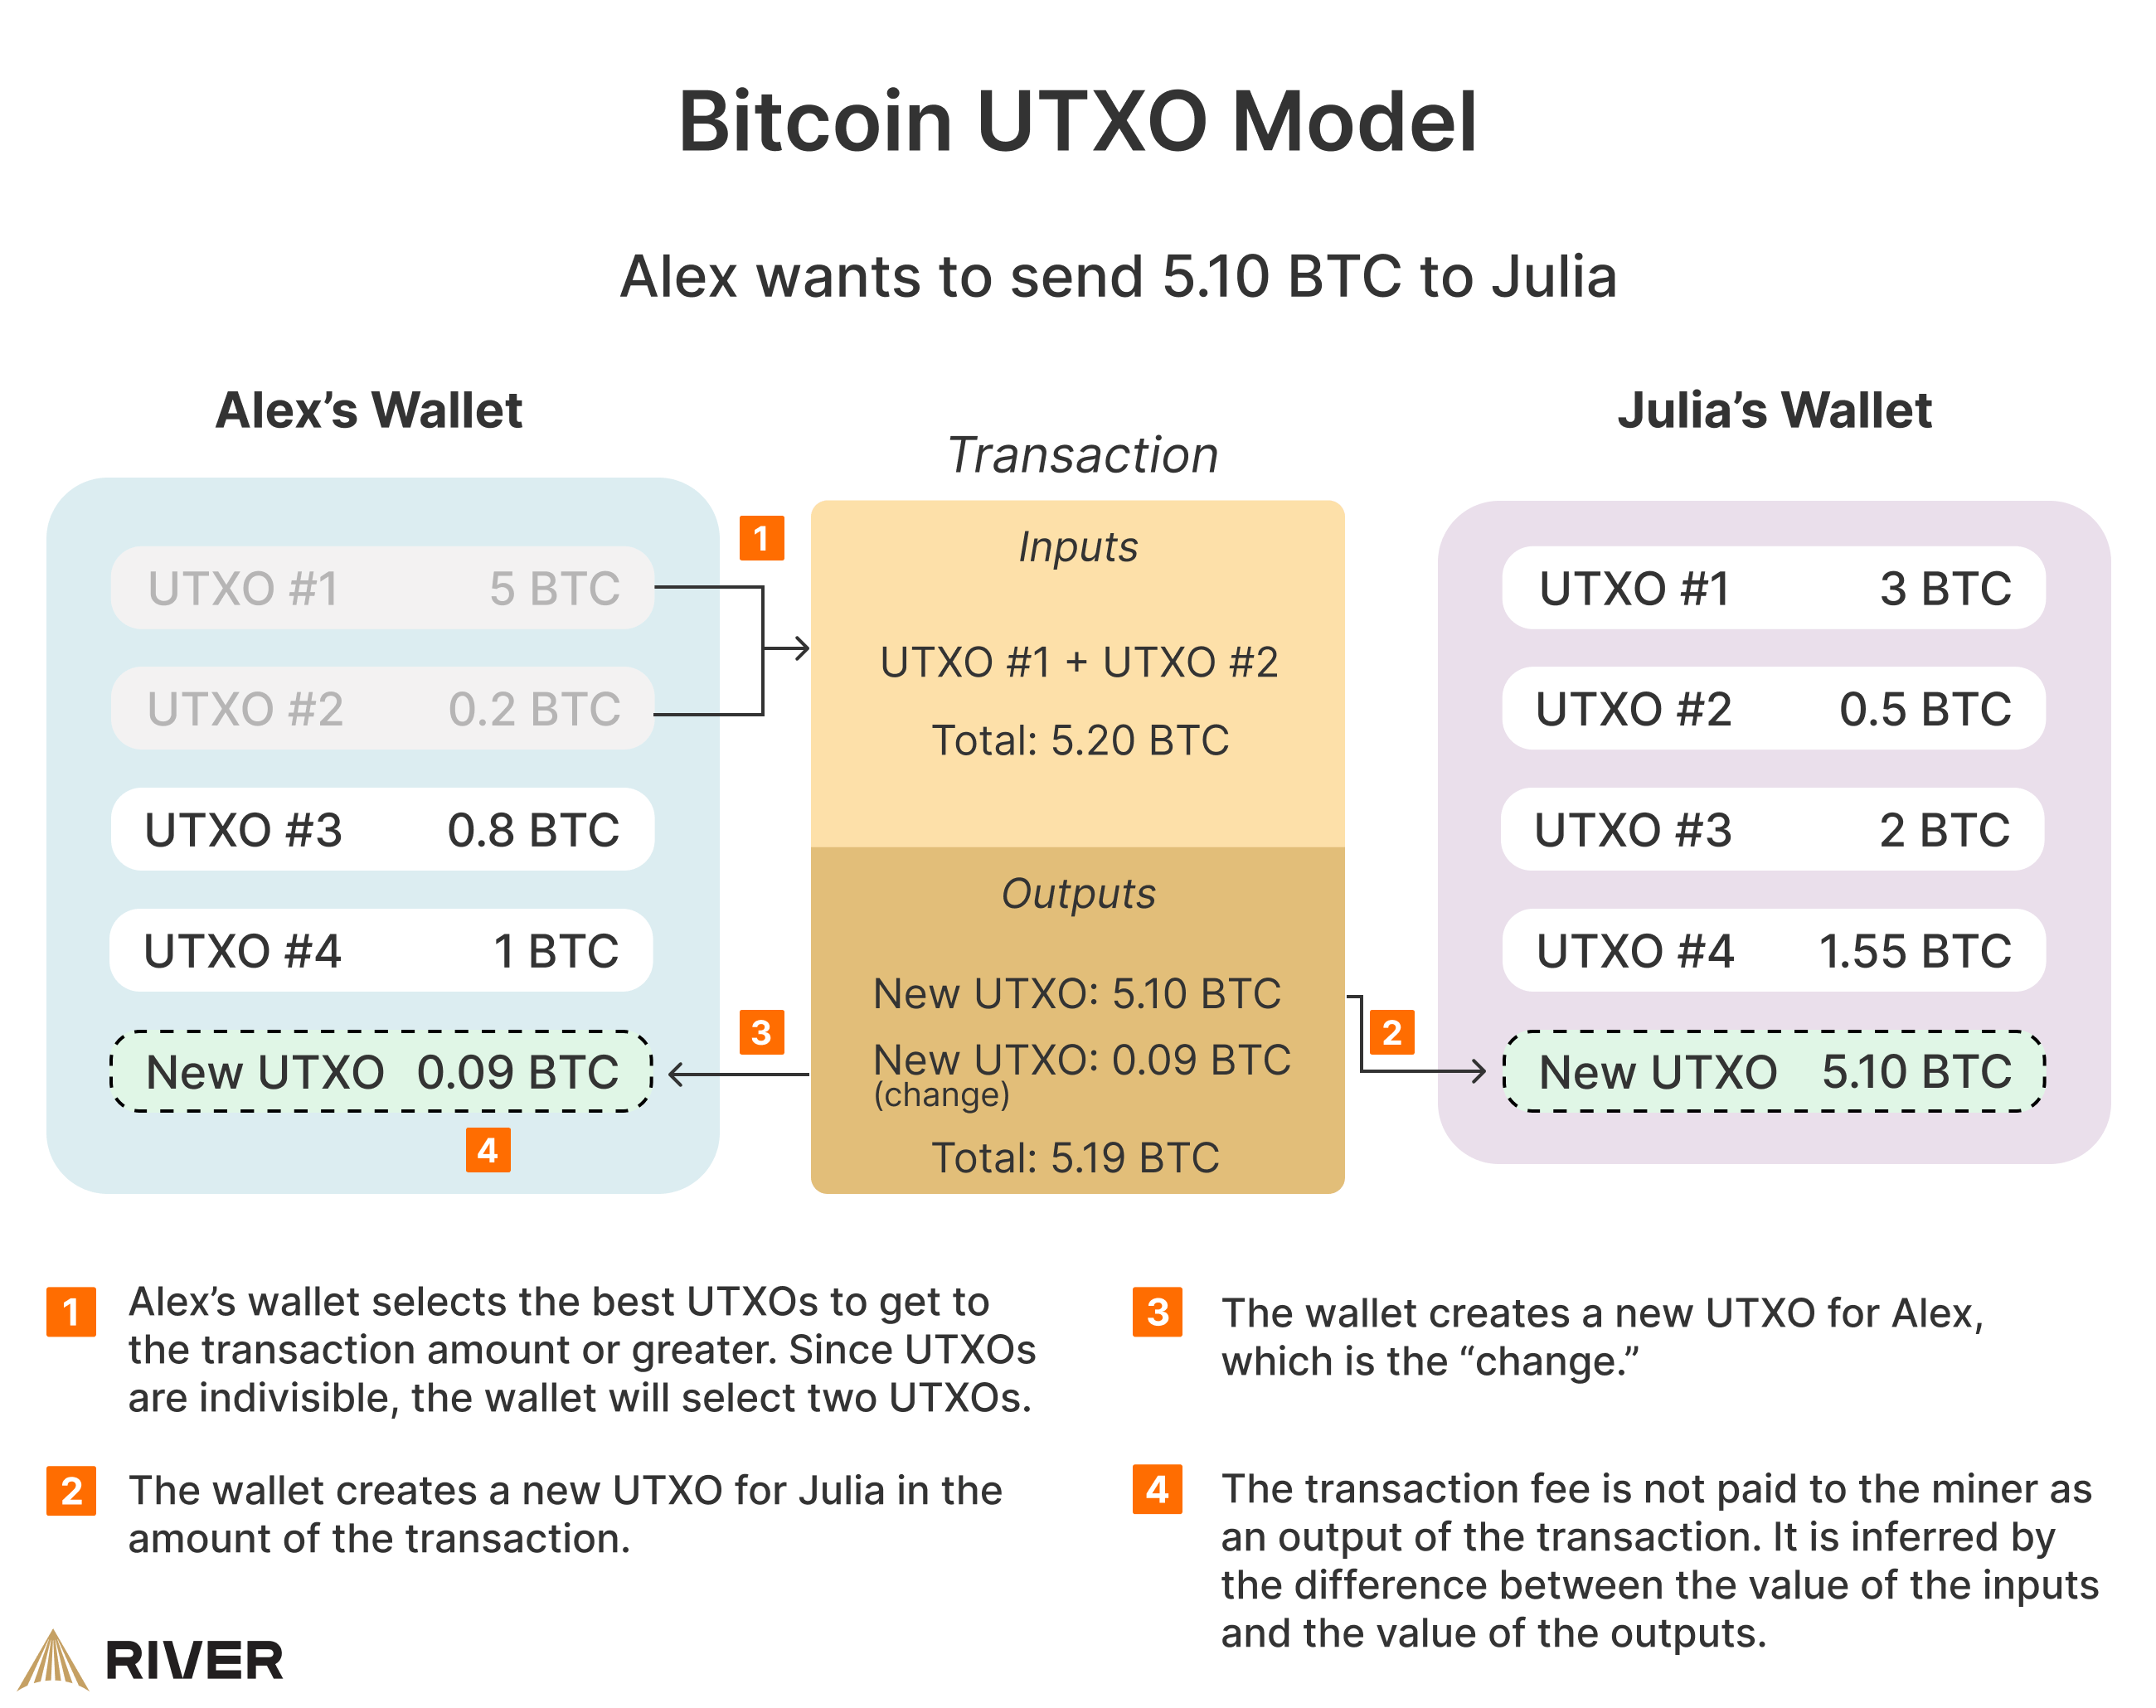 Bitcoin UTXO model showing Alex’s wallet transferring 5.10 BTC to Julia with inputs, outputs, and fees